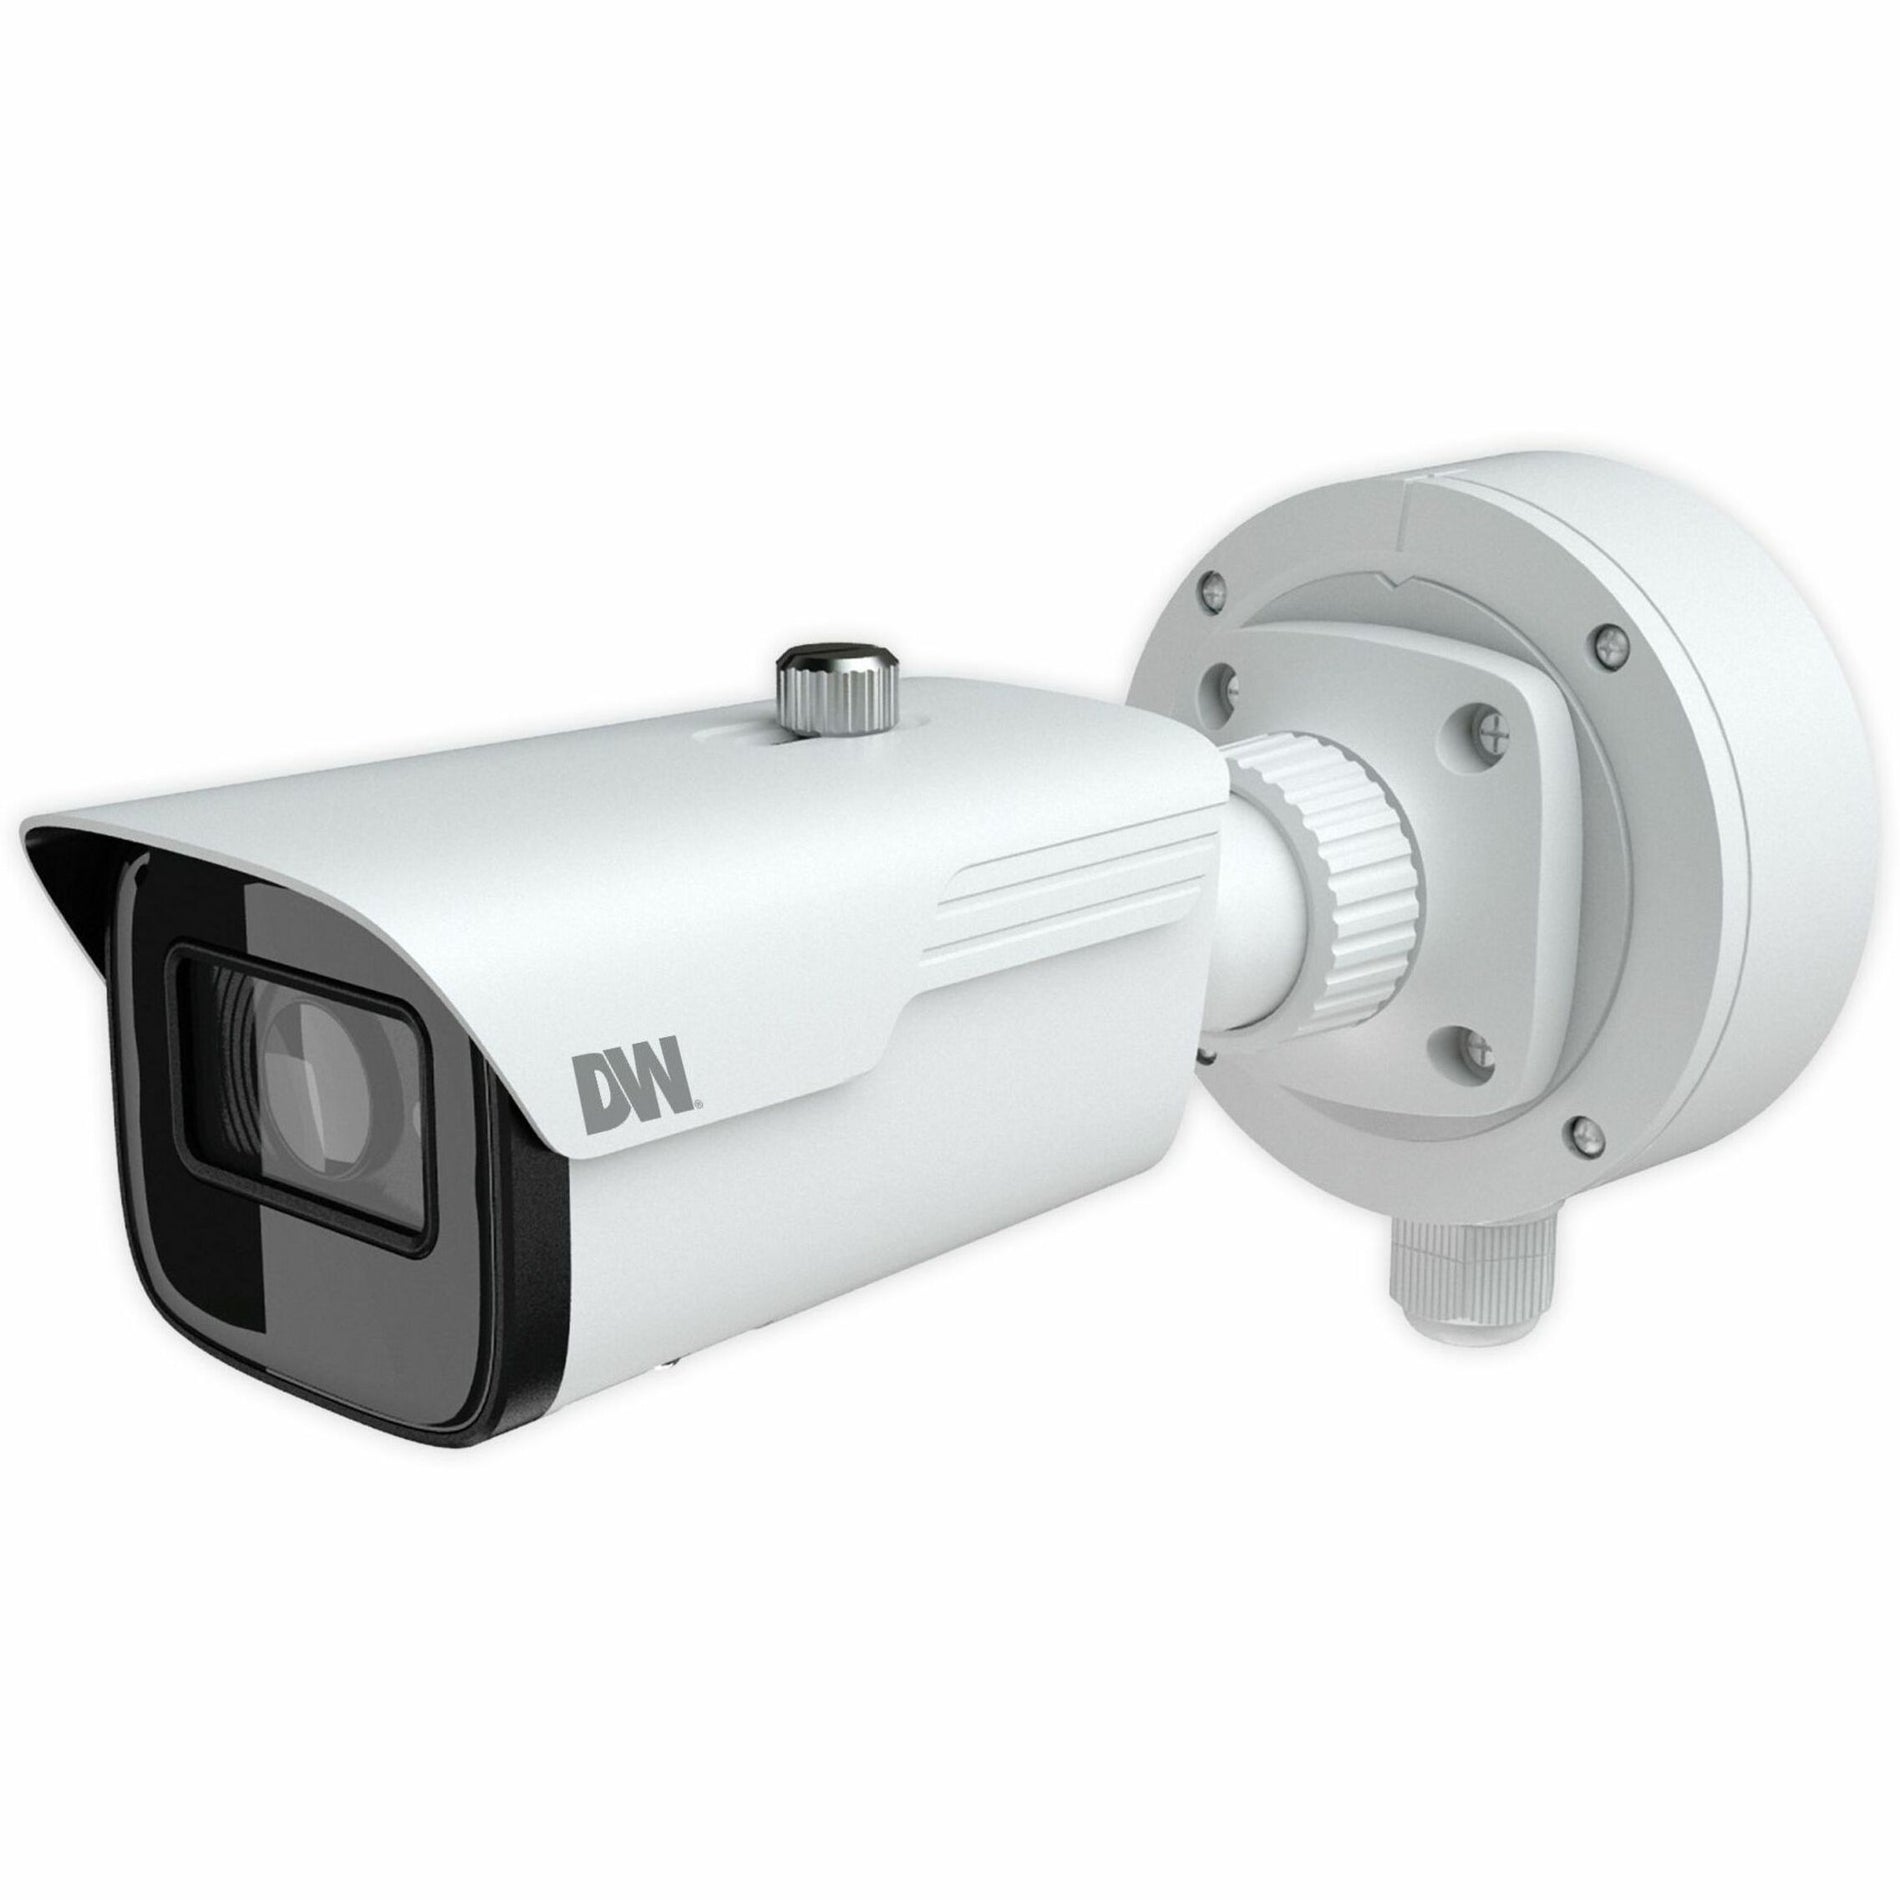 Digital Watchdog DWC-MB95WI28TW MEGApix 5MP bullet IP camera with fixed lens options and IR, 2.8mm lens, 1080p video, SD card storage, 5-year warranty